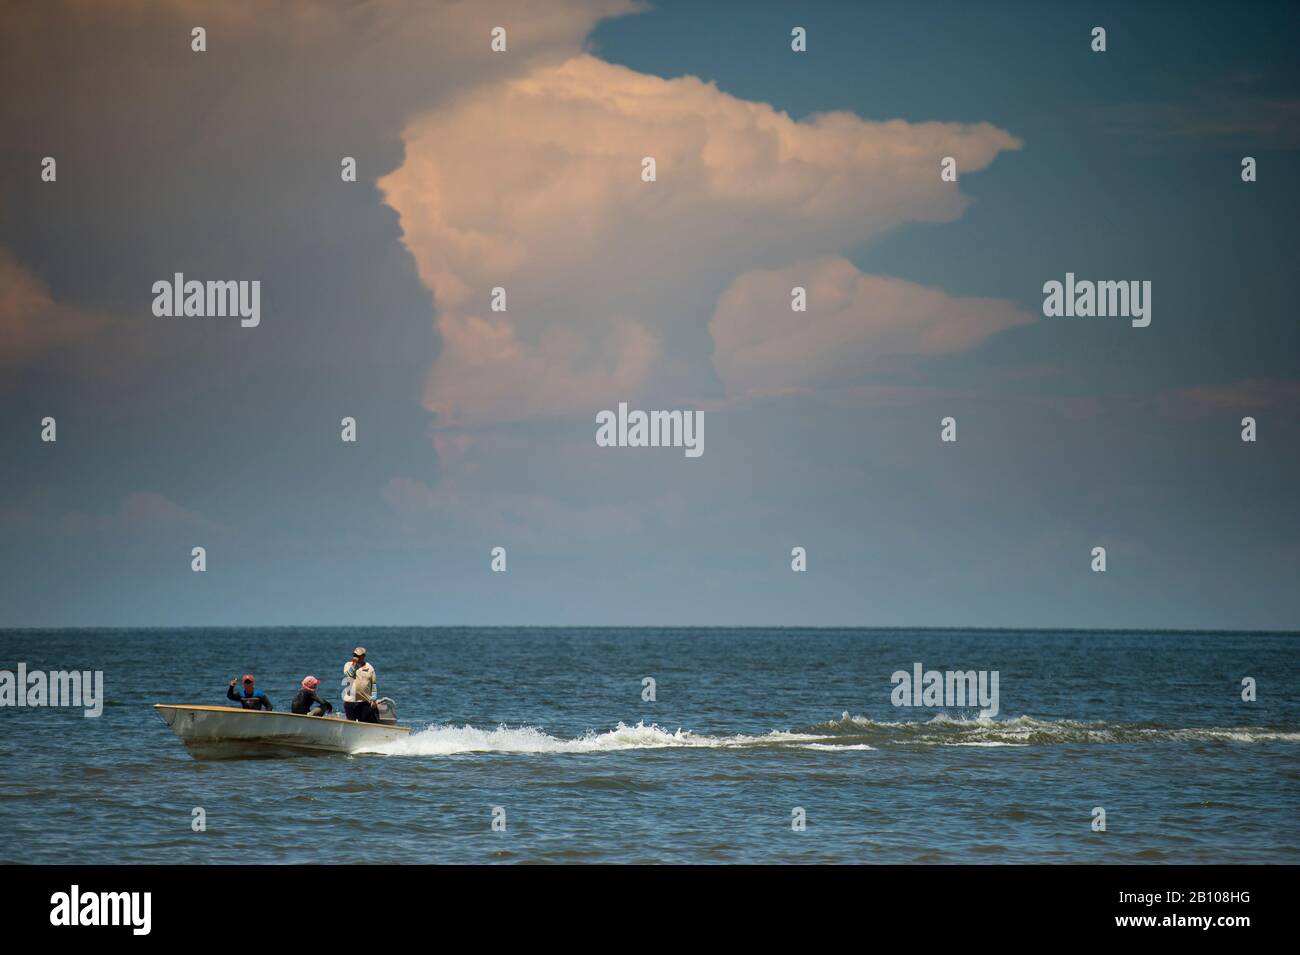 Hooded fishermen sail along Lake Maracaibo in front of newly formed storm clouds (Catatumbo thunderstorm, the place with the highest lightning density on earth) Ologa, Zulia, Venezuela, South America Stock Photo